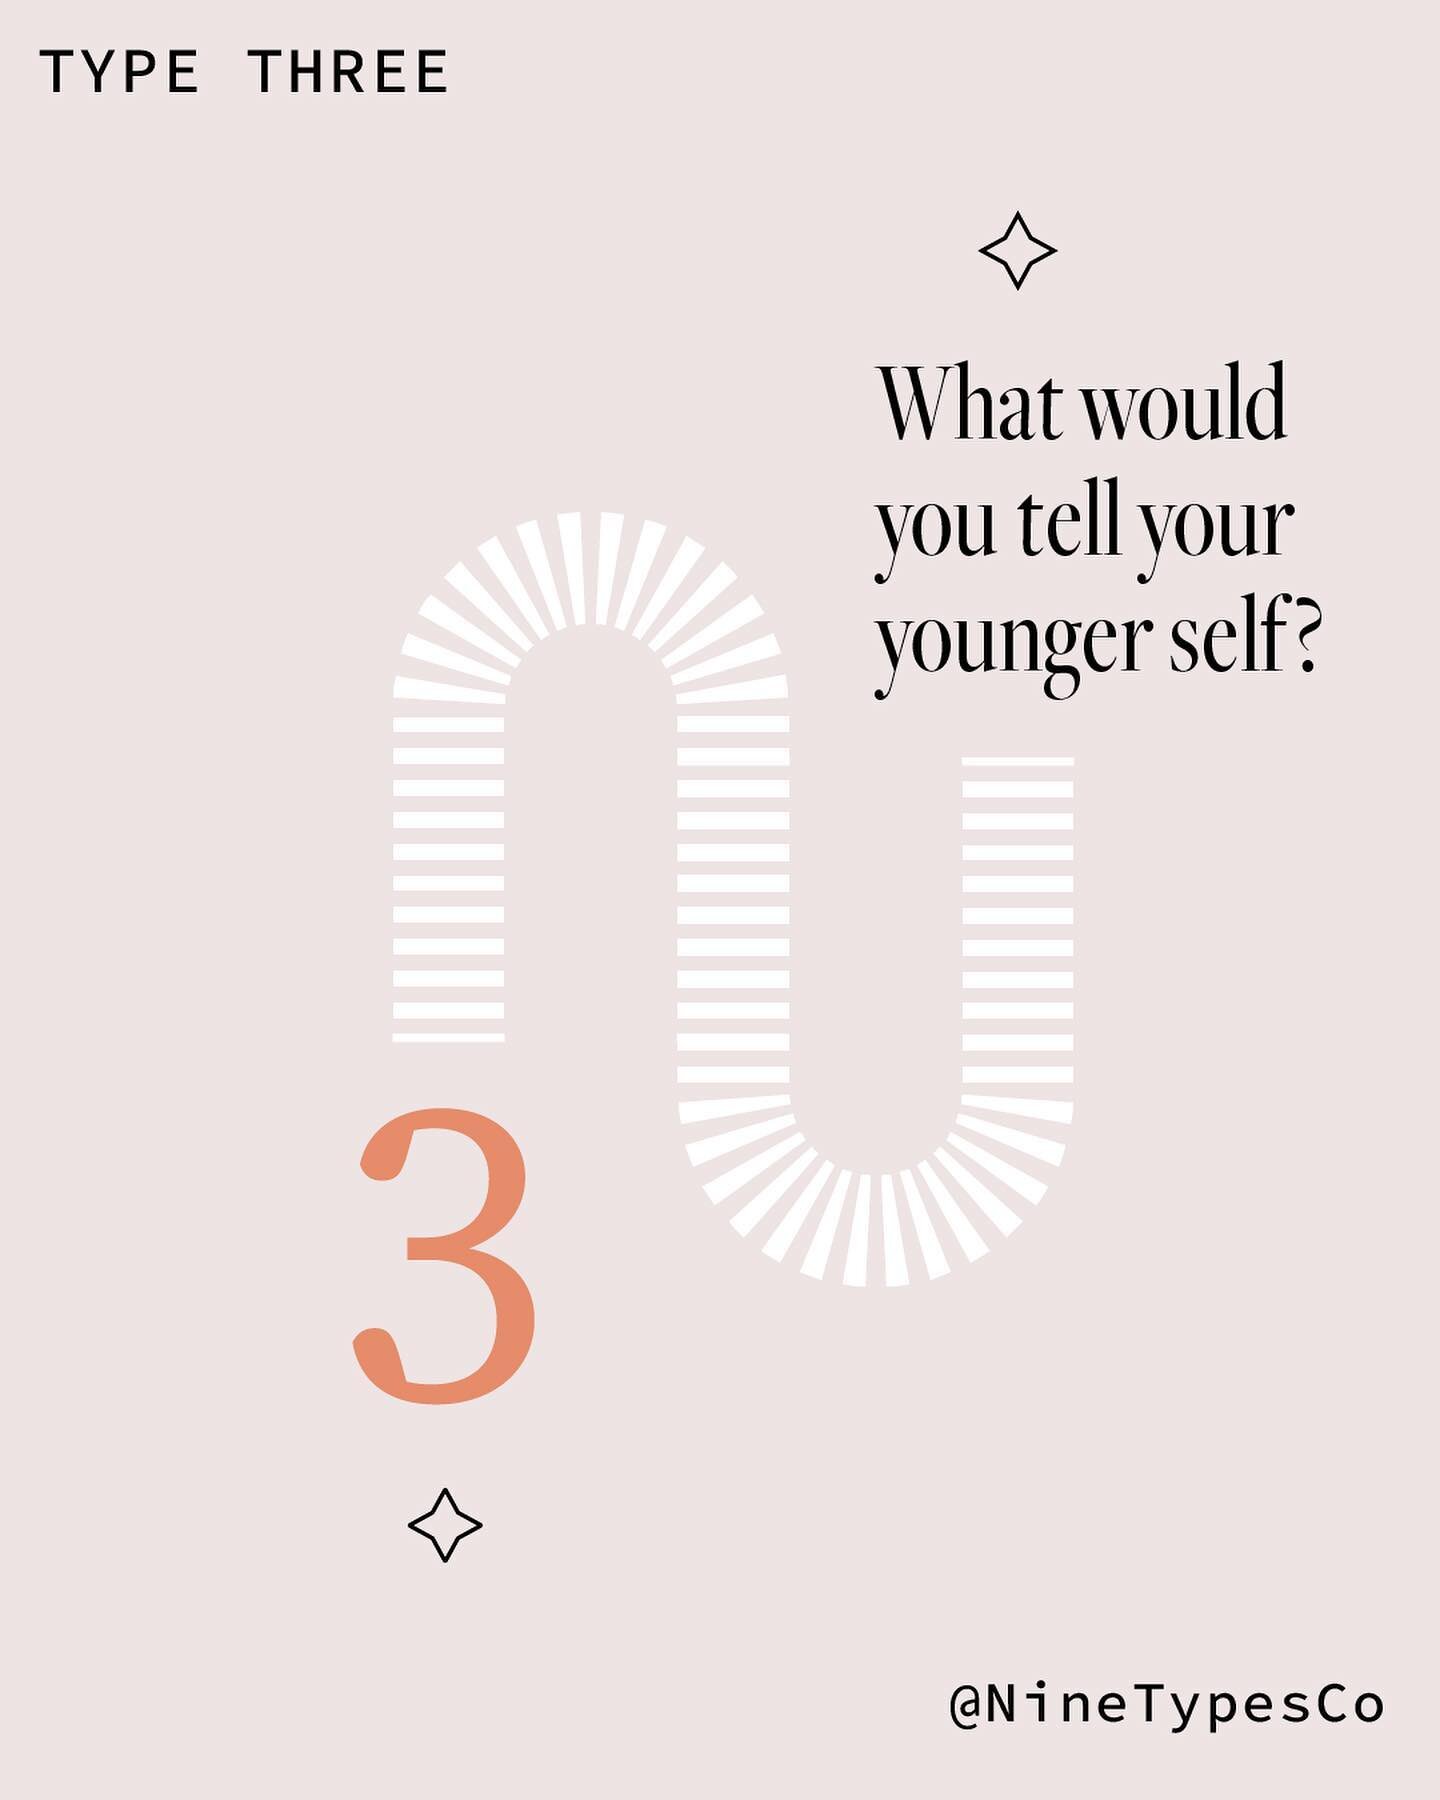 What would you tell your younger self?

I love this question because it always helps me connect with more kindness and compassion for my younger self. I often have words of wisdom for my younger self that I still need &ndash; it&rsquo;s always a good